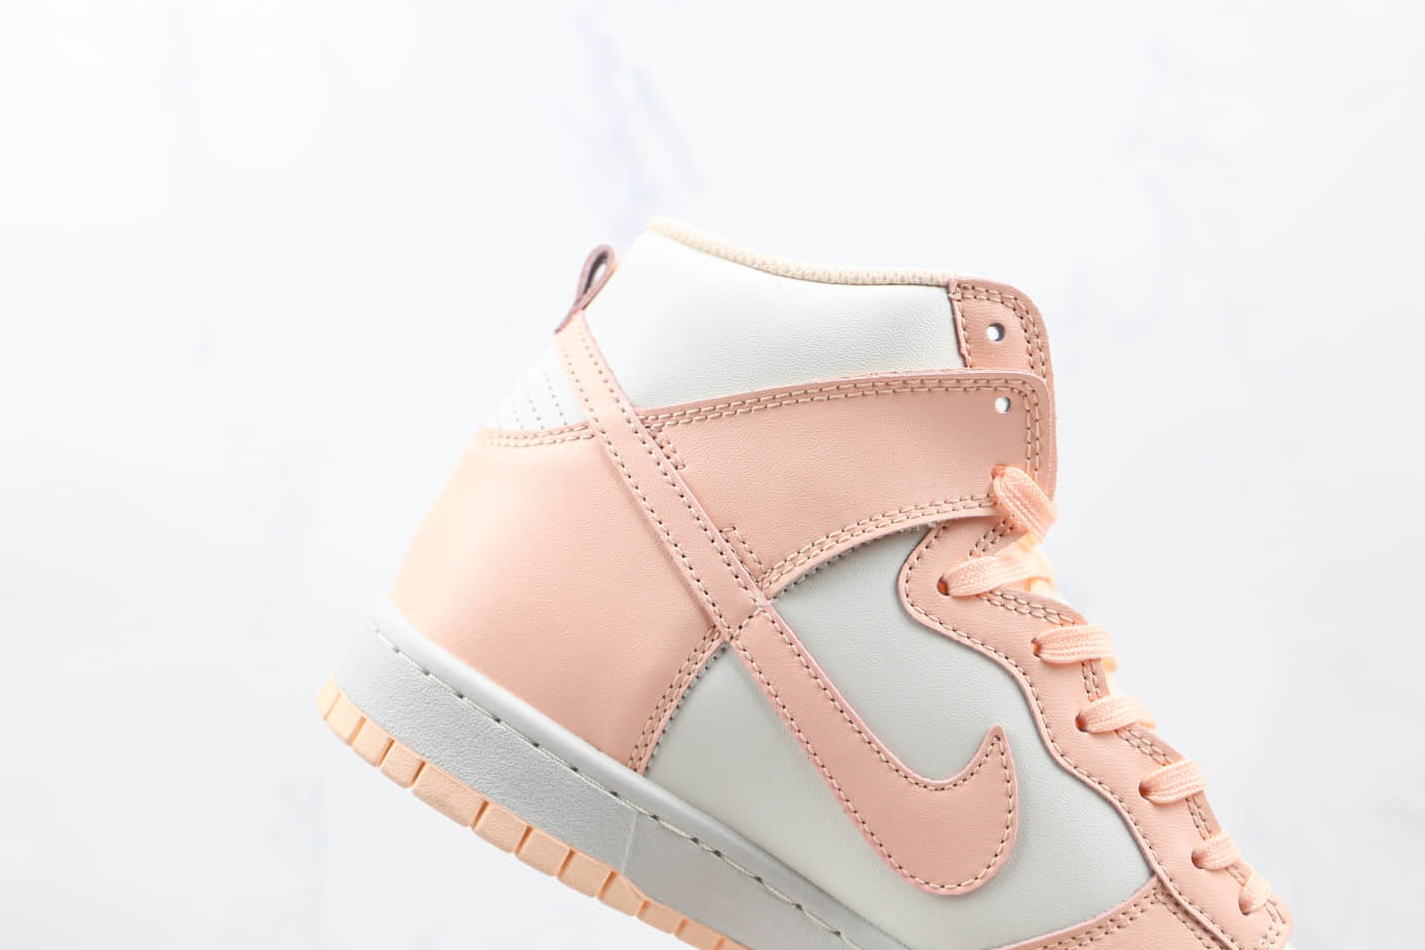 Nike Dunk High 'Crimson Tint' DD1869-104 - Limited Edition Sneakers